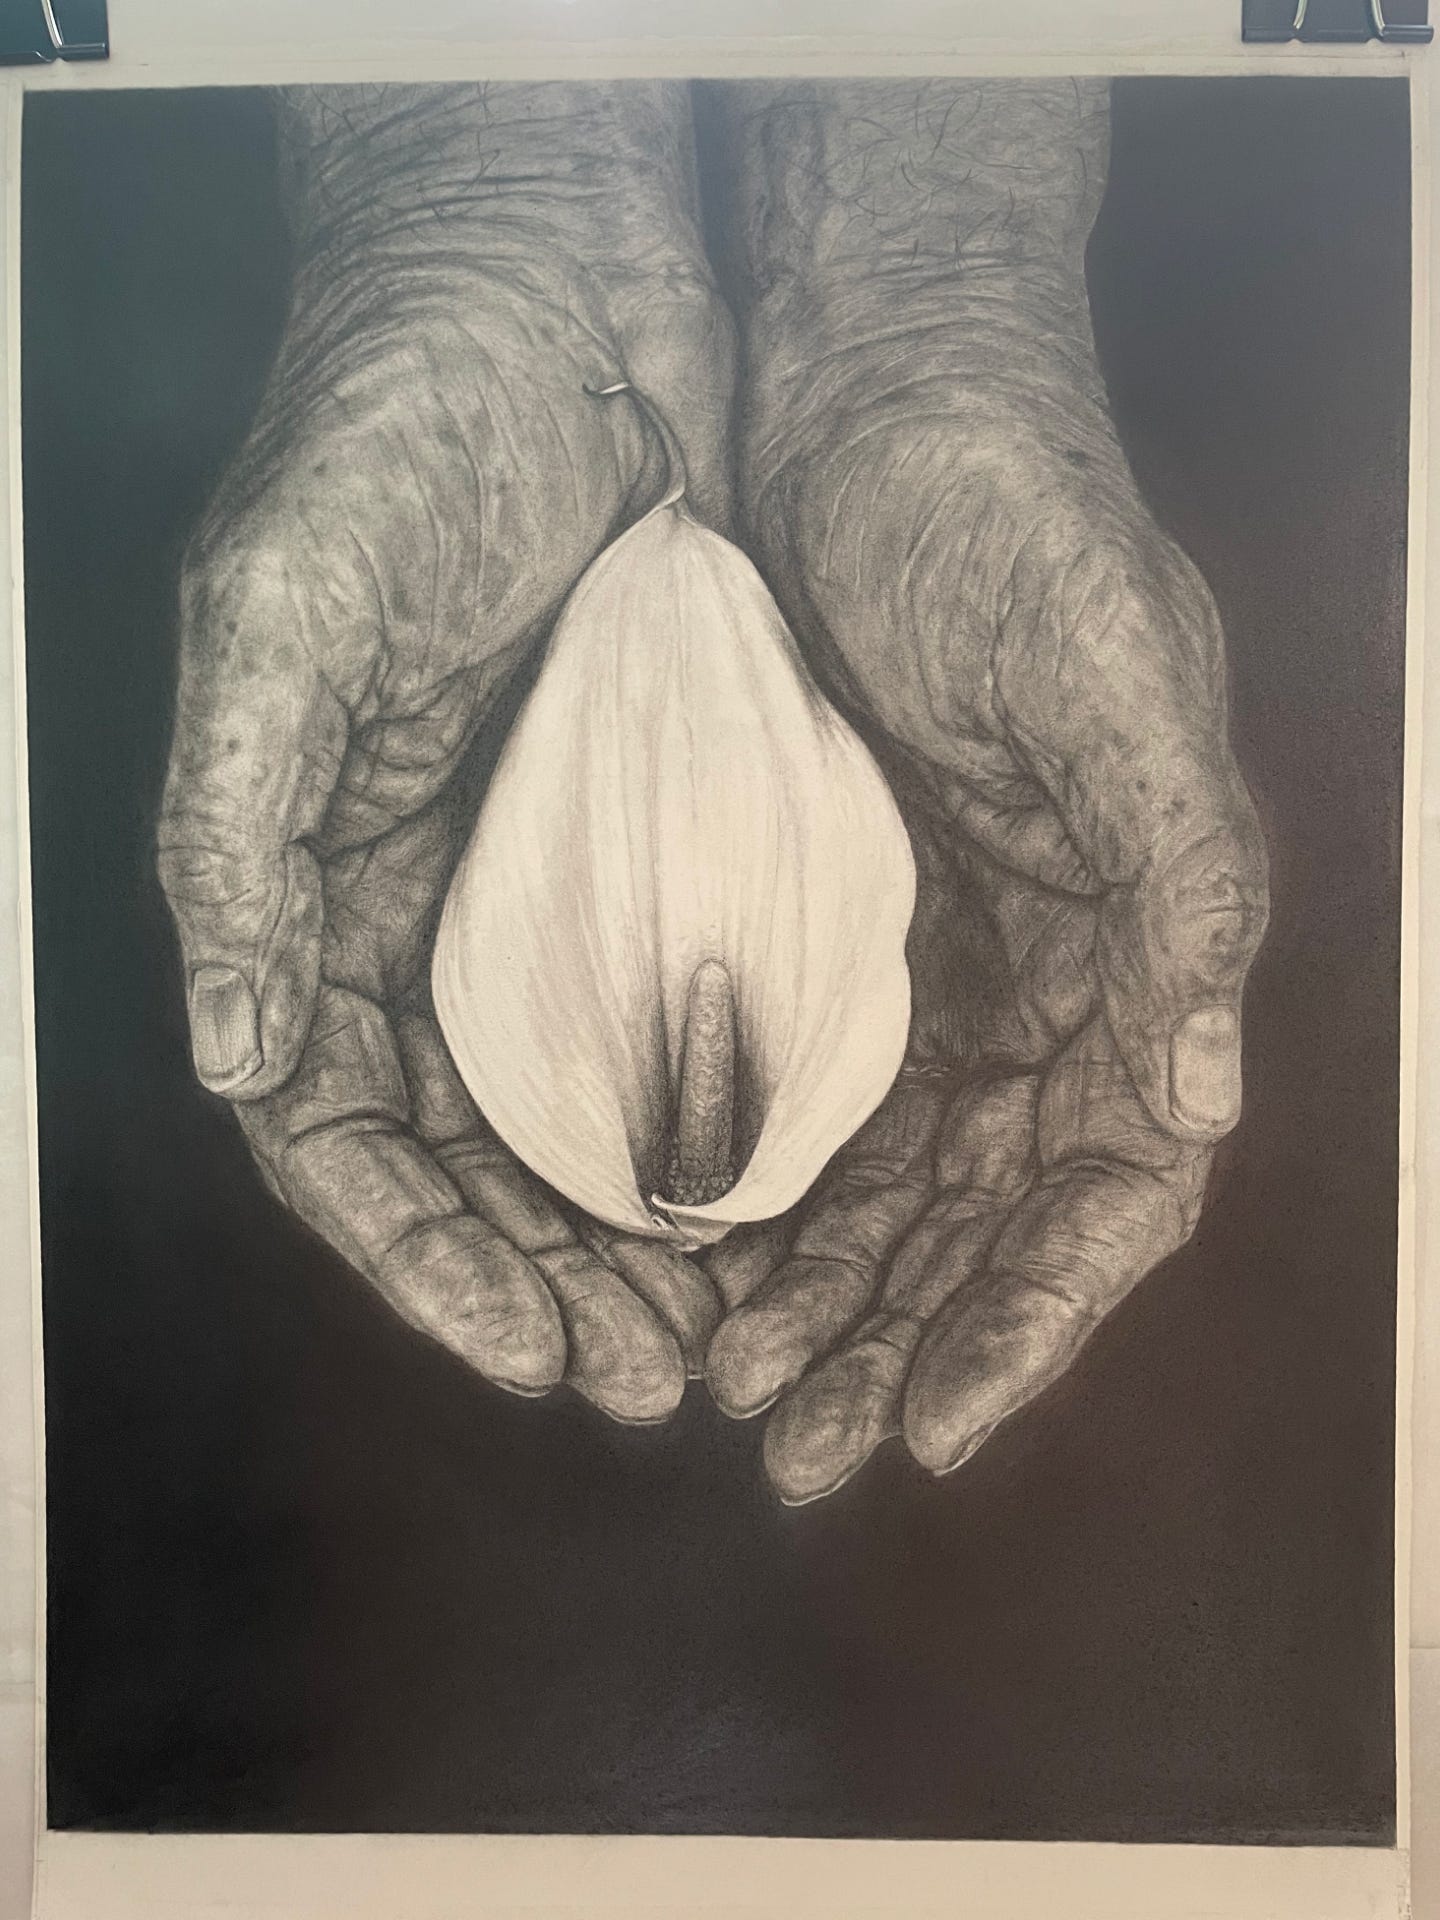 A black and white drawing depicting a pair of hands making a bowl and holding a white flower